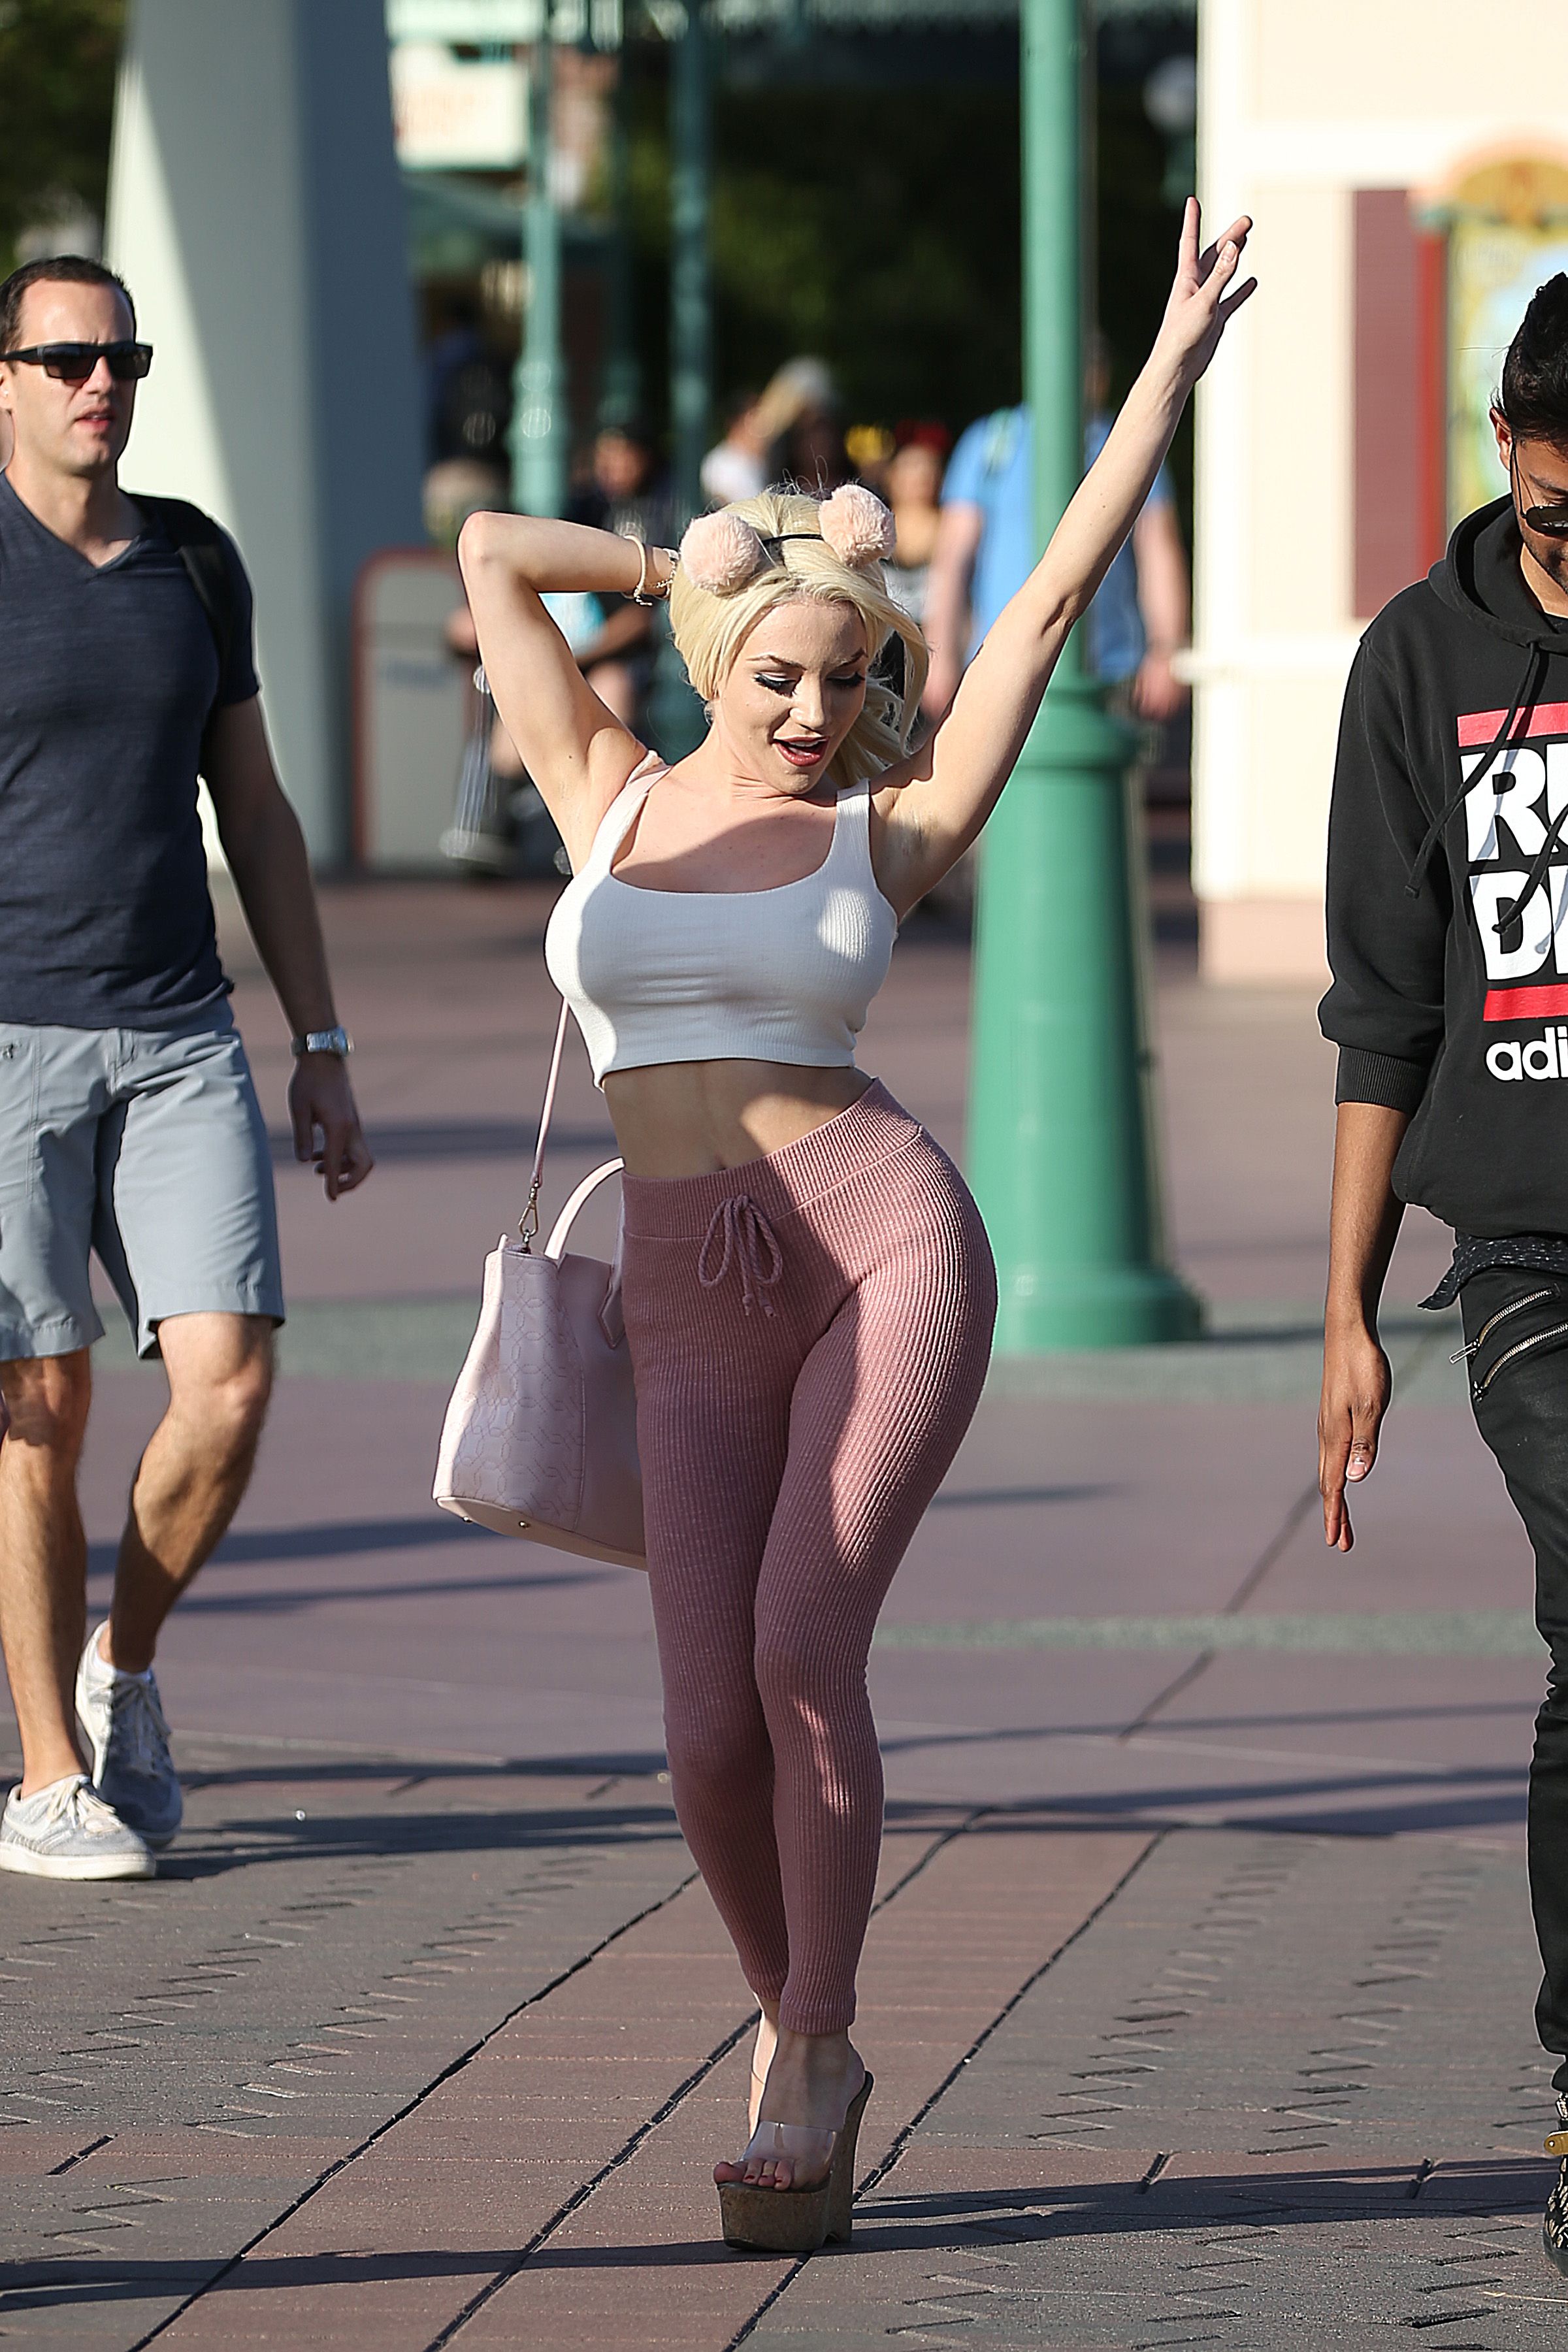 Courtney Stodden’s Boobs Falling Out